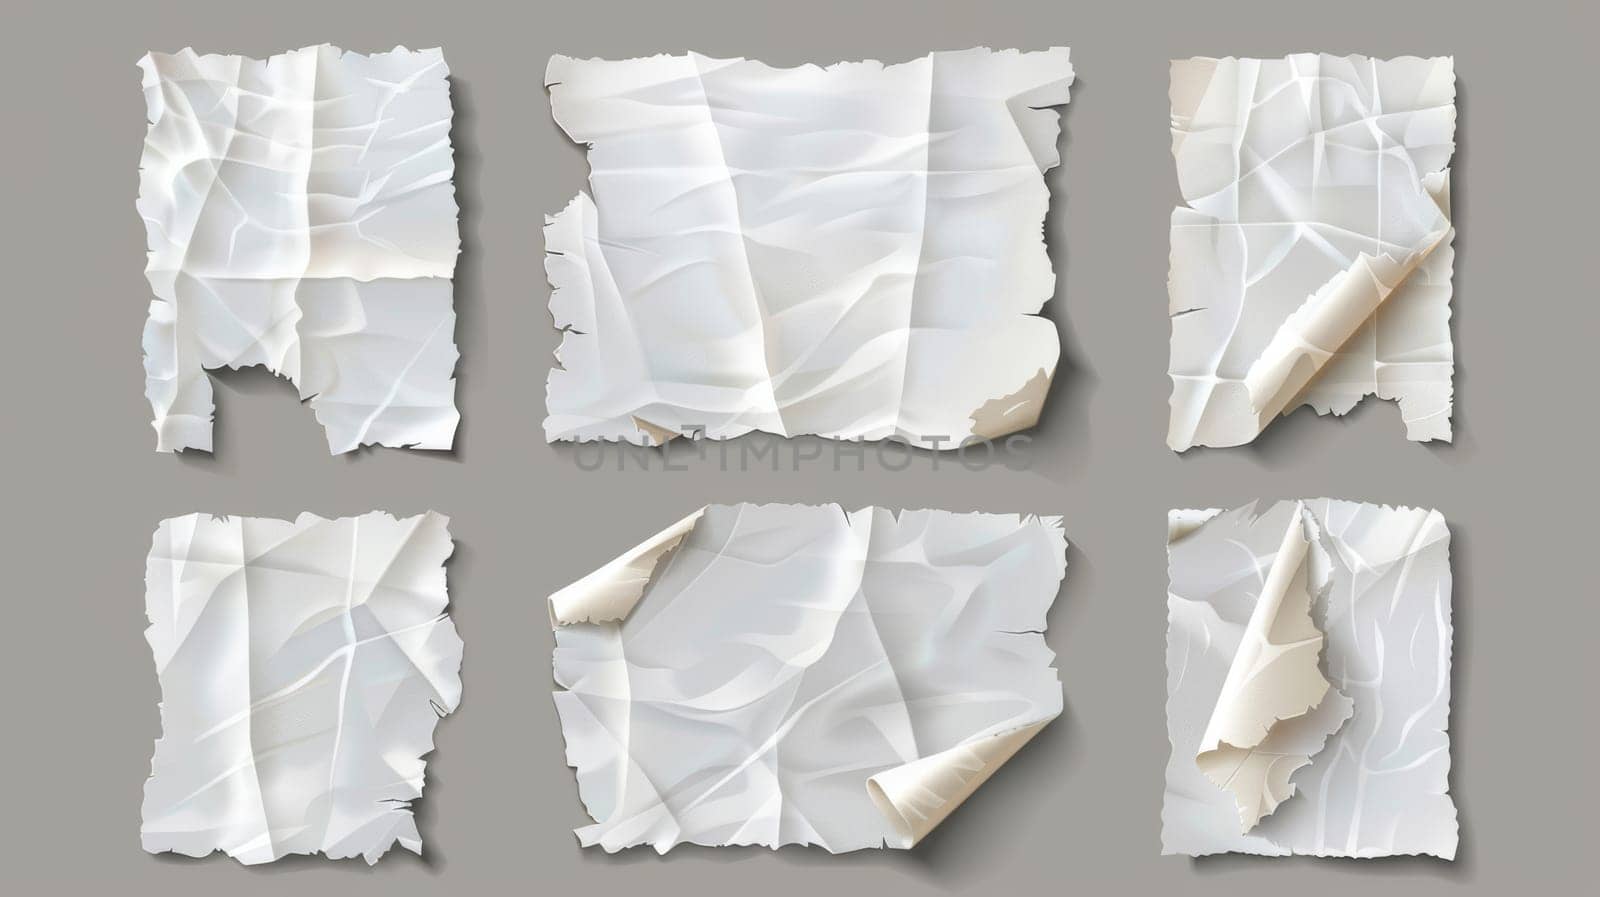 Blank paper pieces with ripped and crumpled edges isolated on gray background, modern illustration. Torn, ripped and crumpled white notes isolated on gray background.